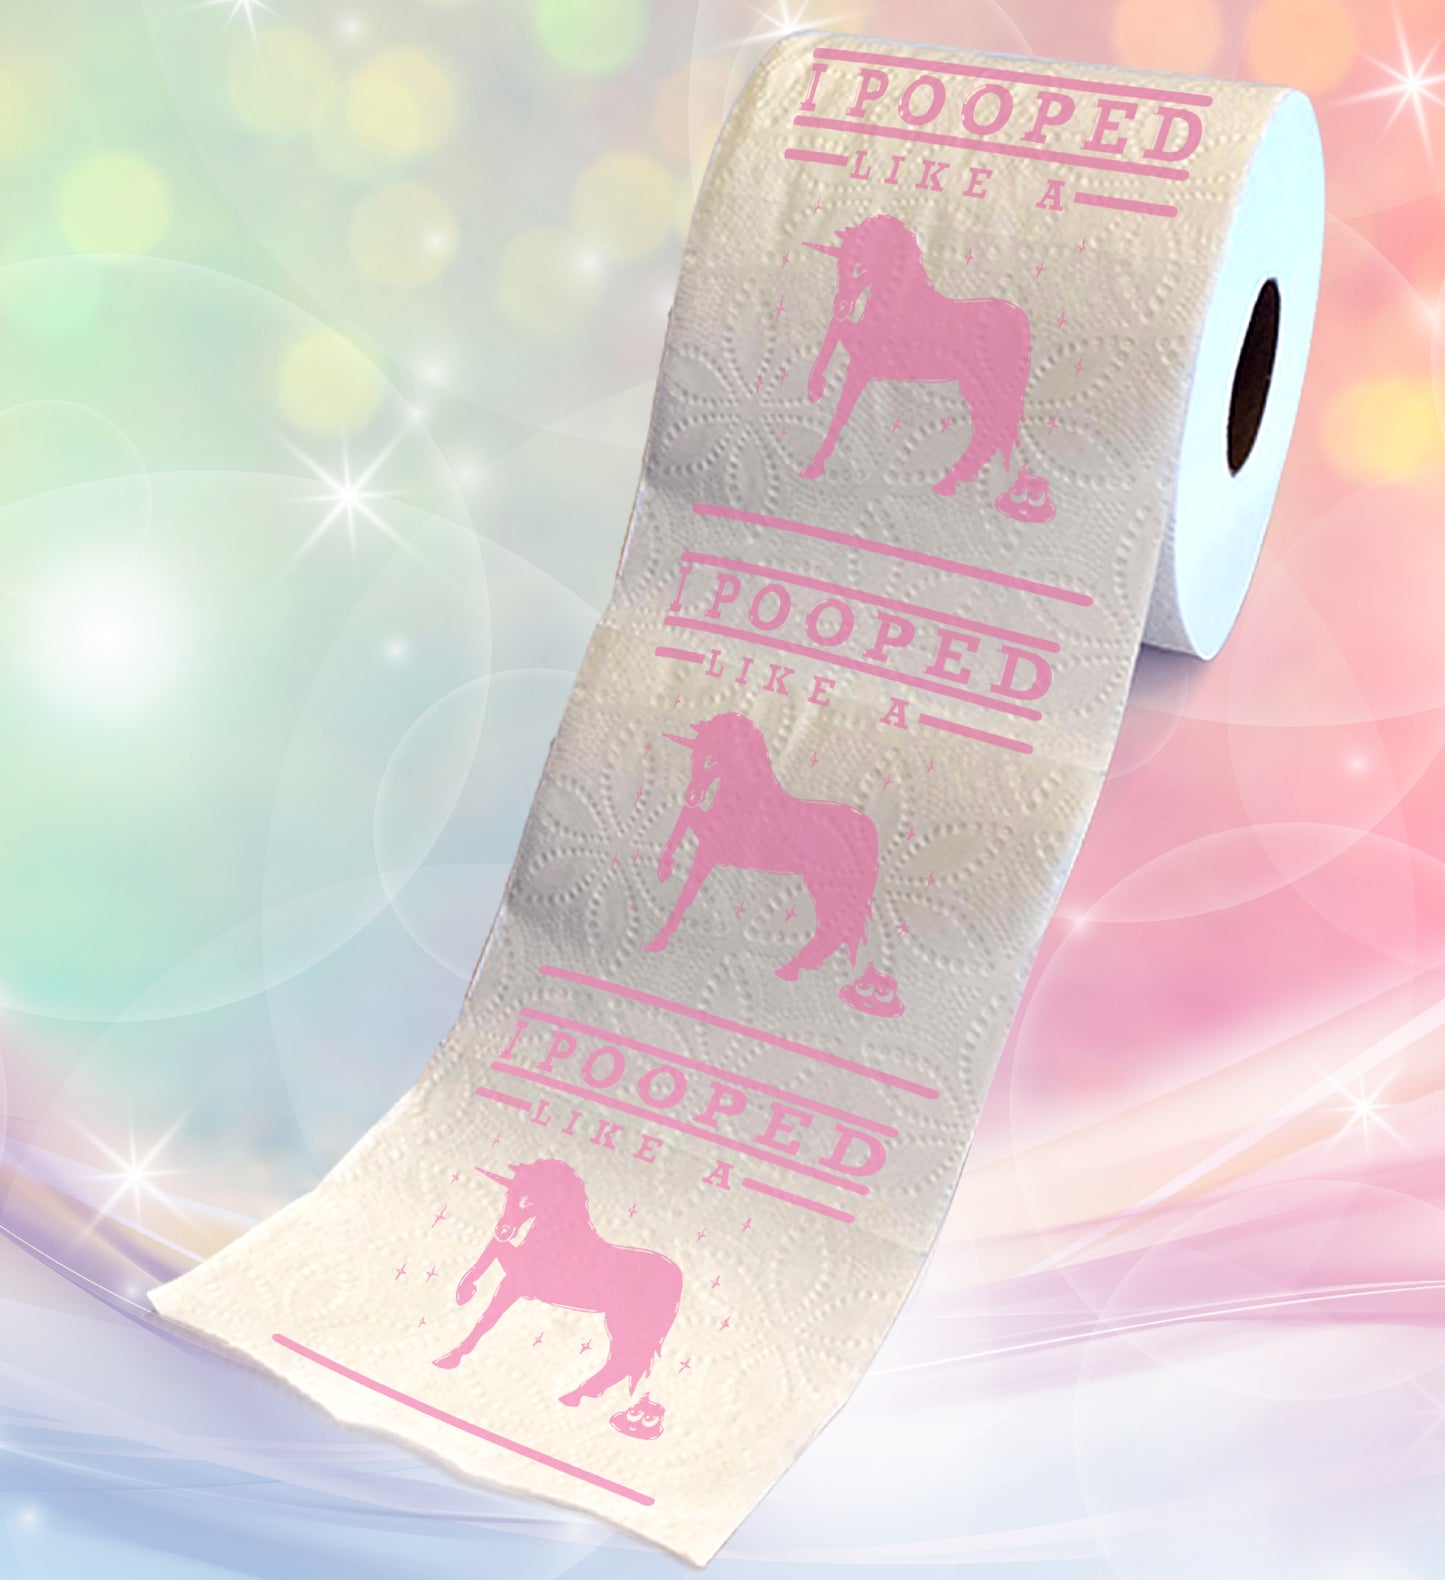 Printed TP I Pooped Like A Unicorn Printed Toilet Paper Gag Gift - 500 Sheets